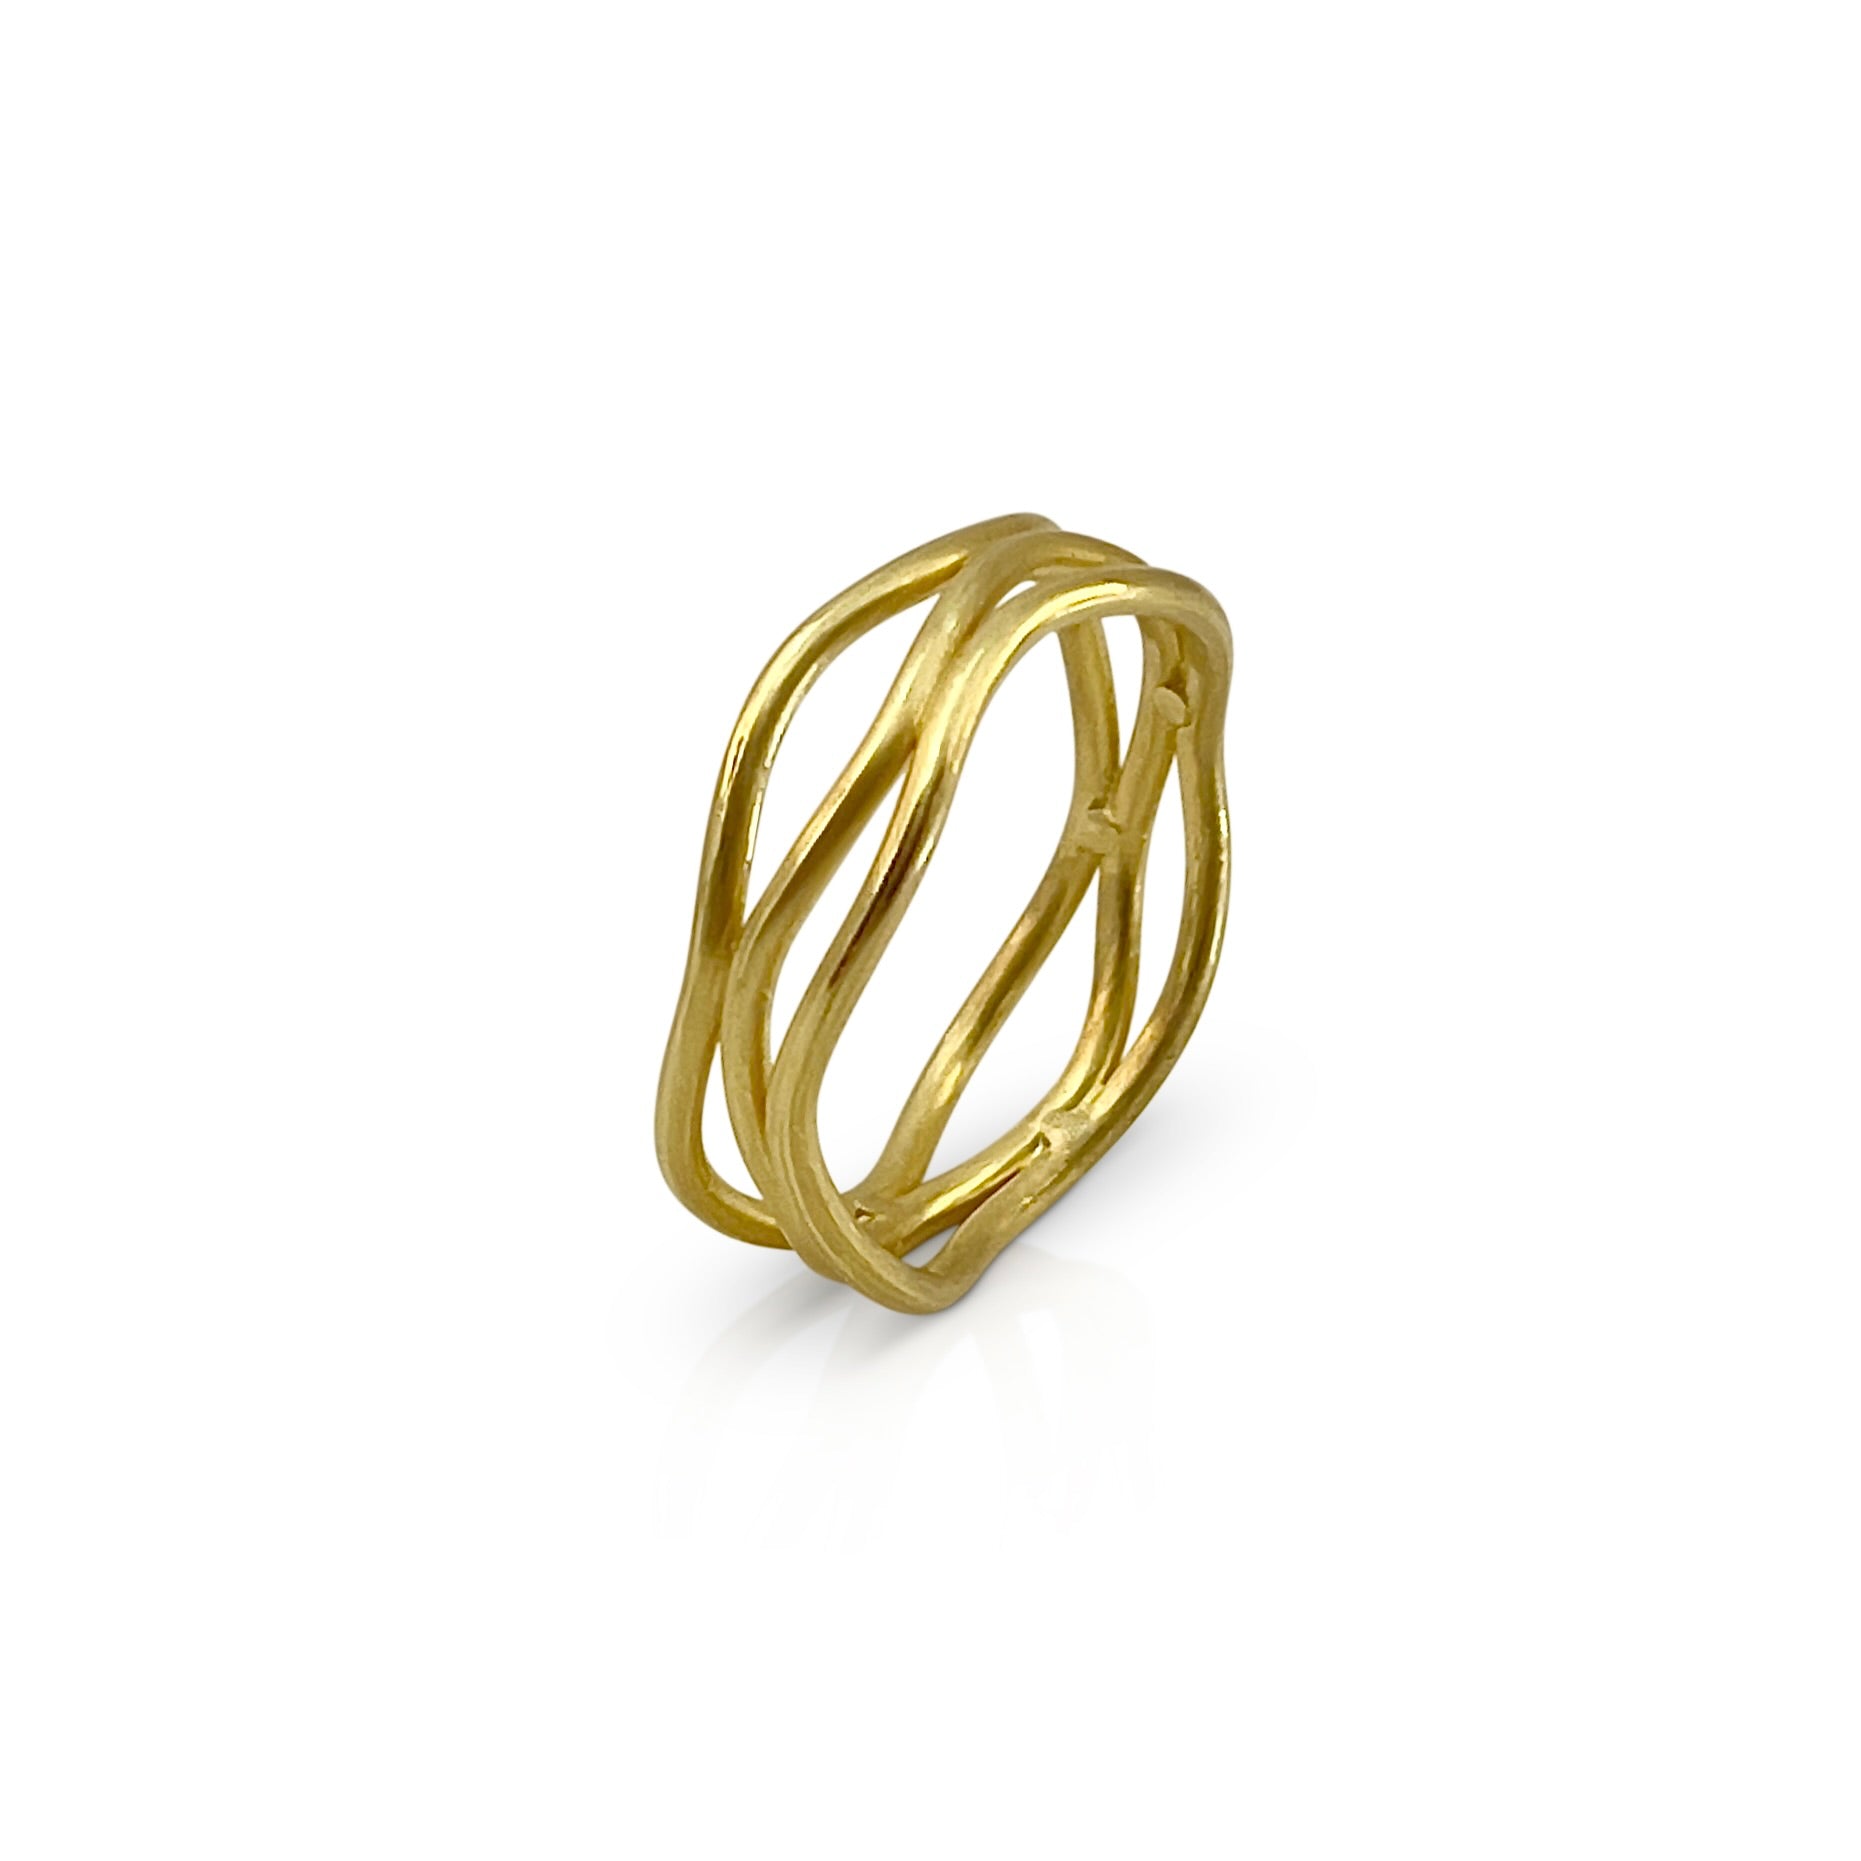 Triple layer serpentine ring in 18K yellow gold by Ayesha Mayadas